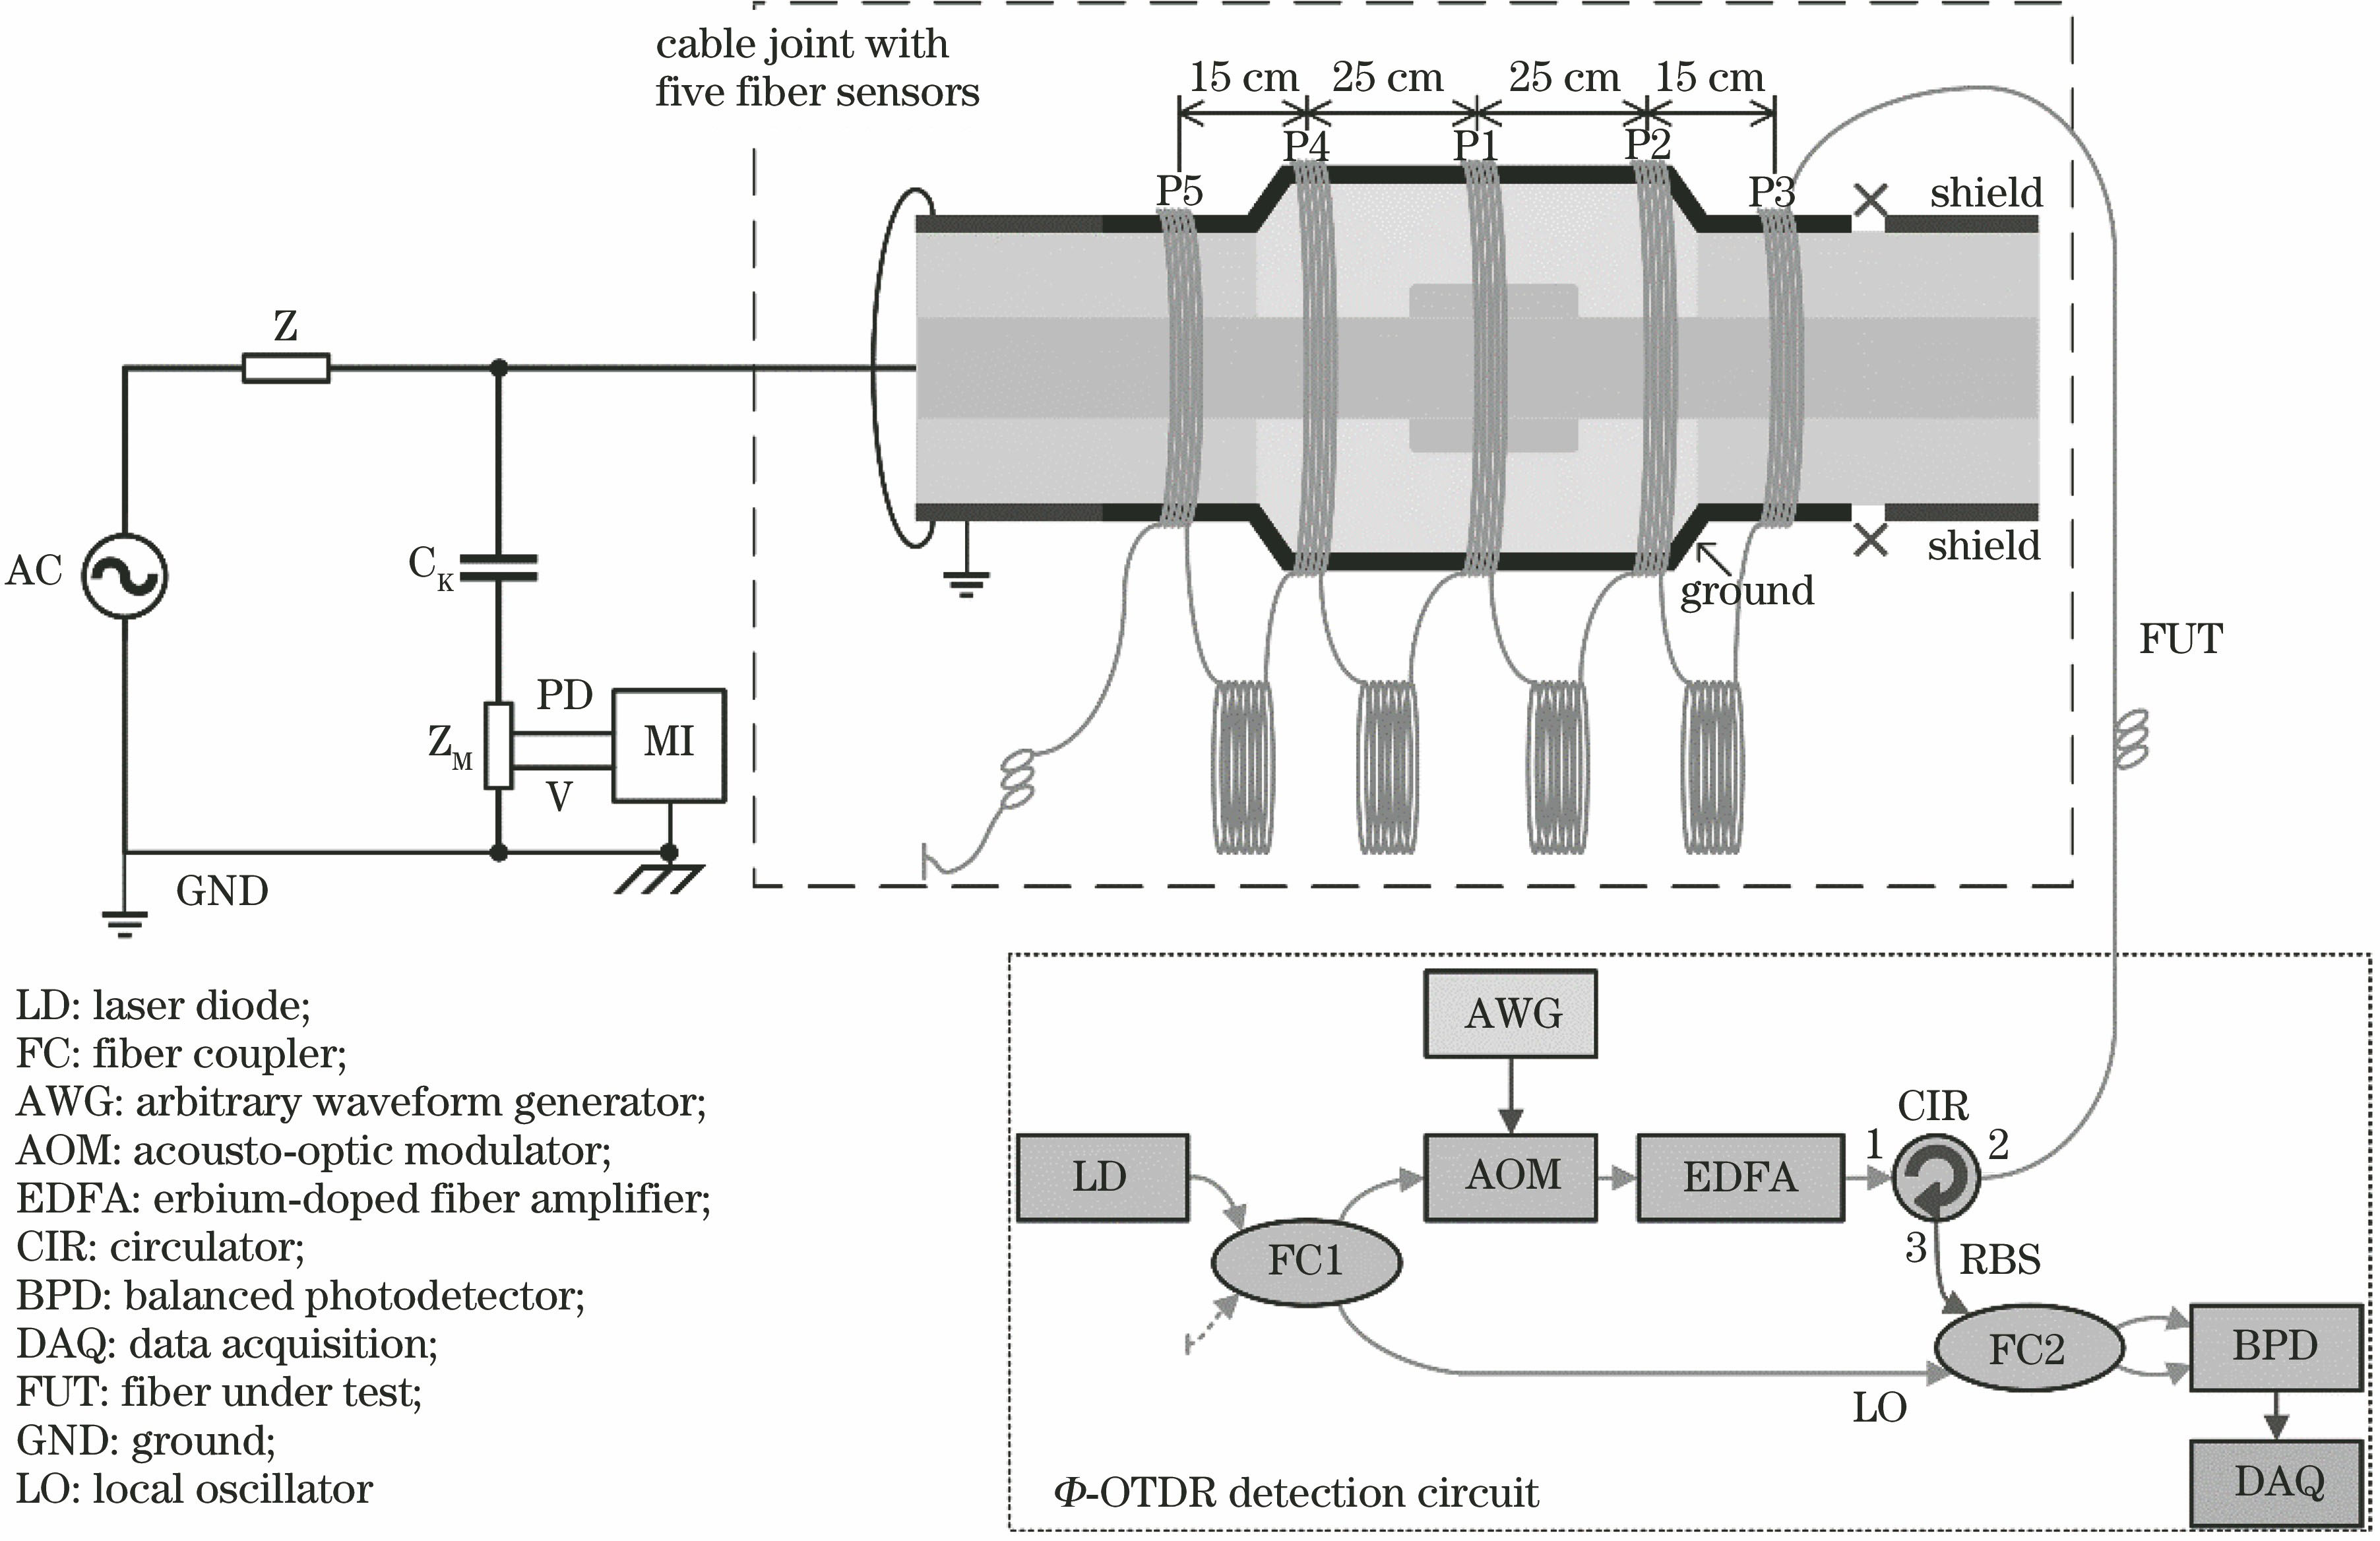 Experimental setup for discharging fault detection of cable joint with Φ-OTDR fiber-optic sensors